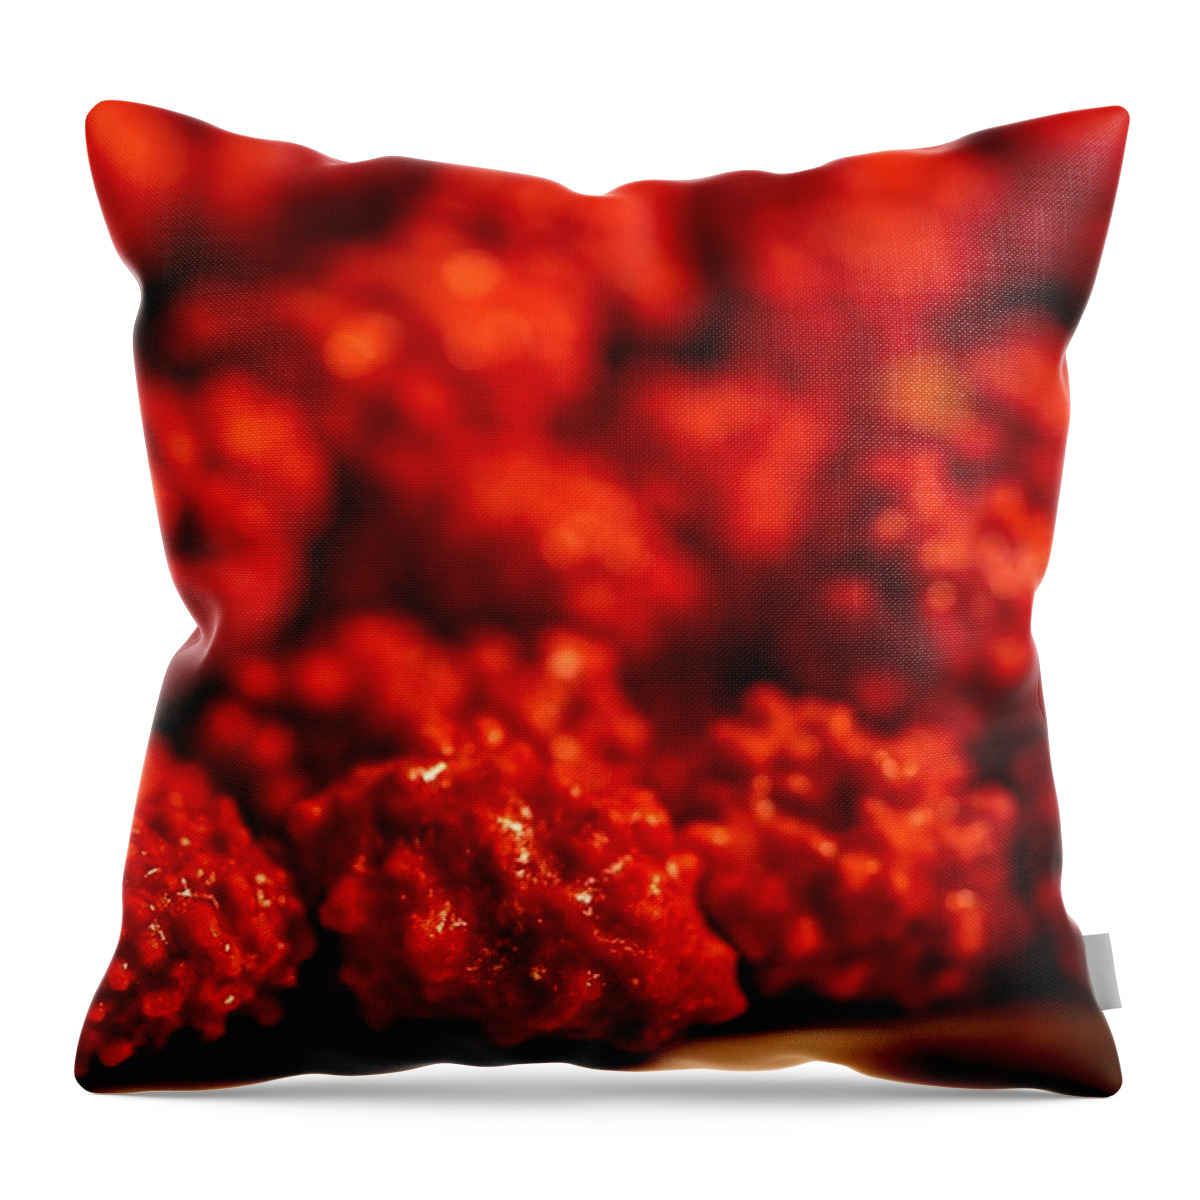 Background Throw Pillow featuring the photograph Yummy Things #2 by Ric Schafer